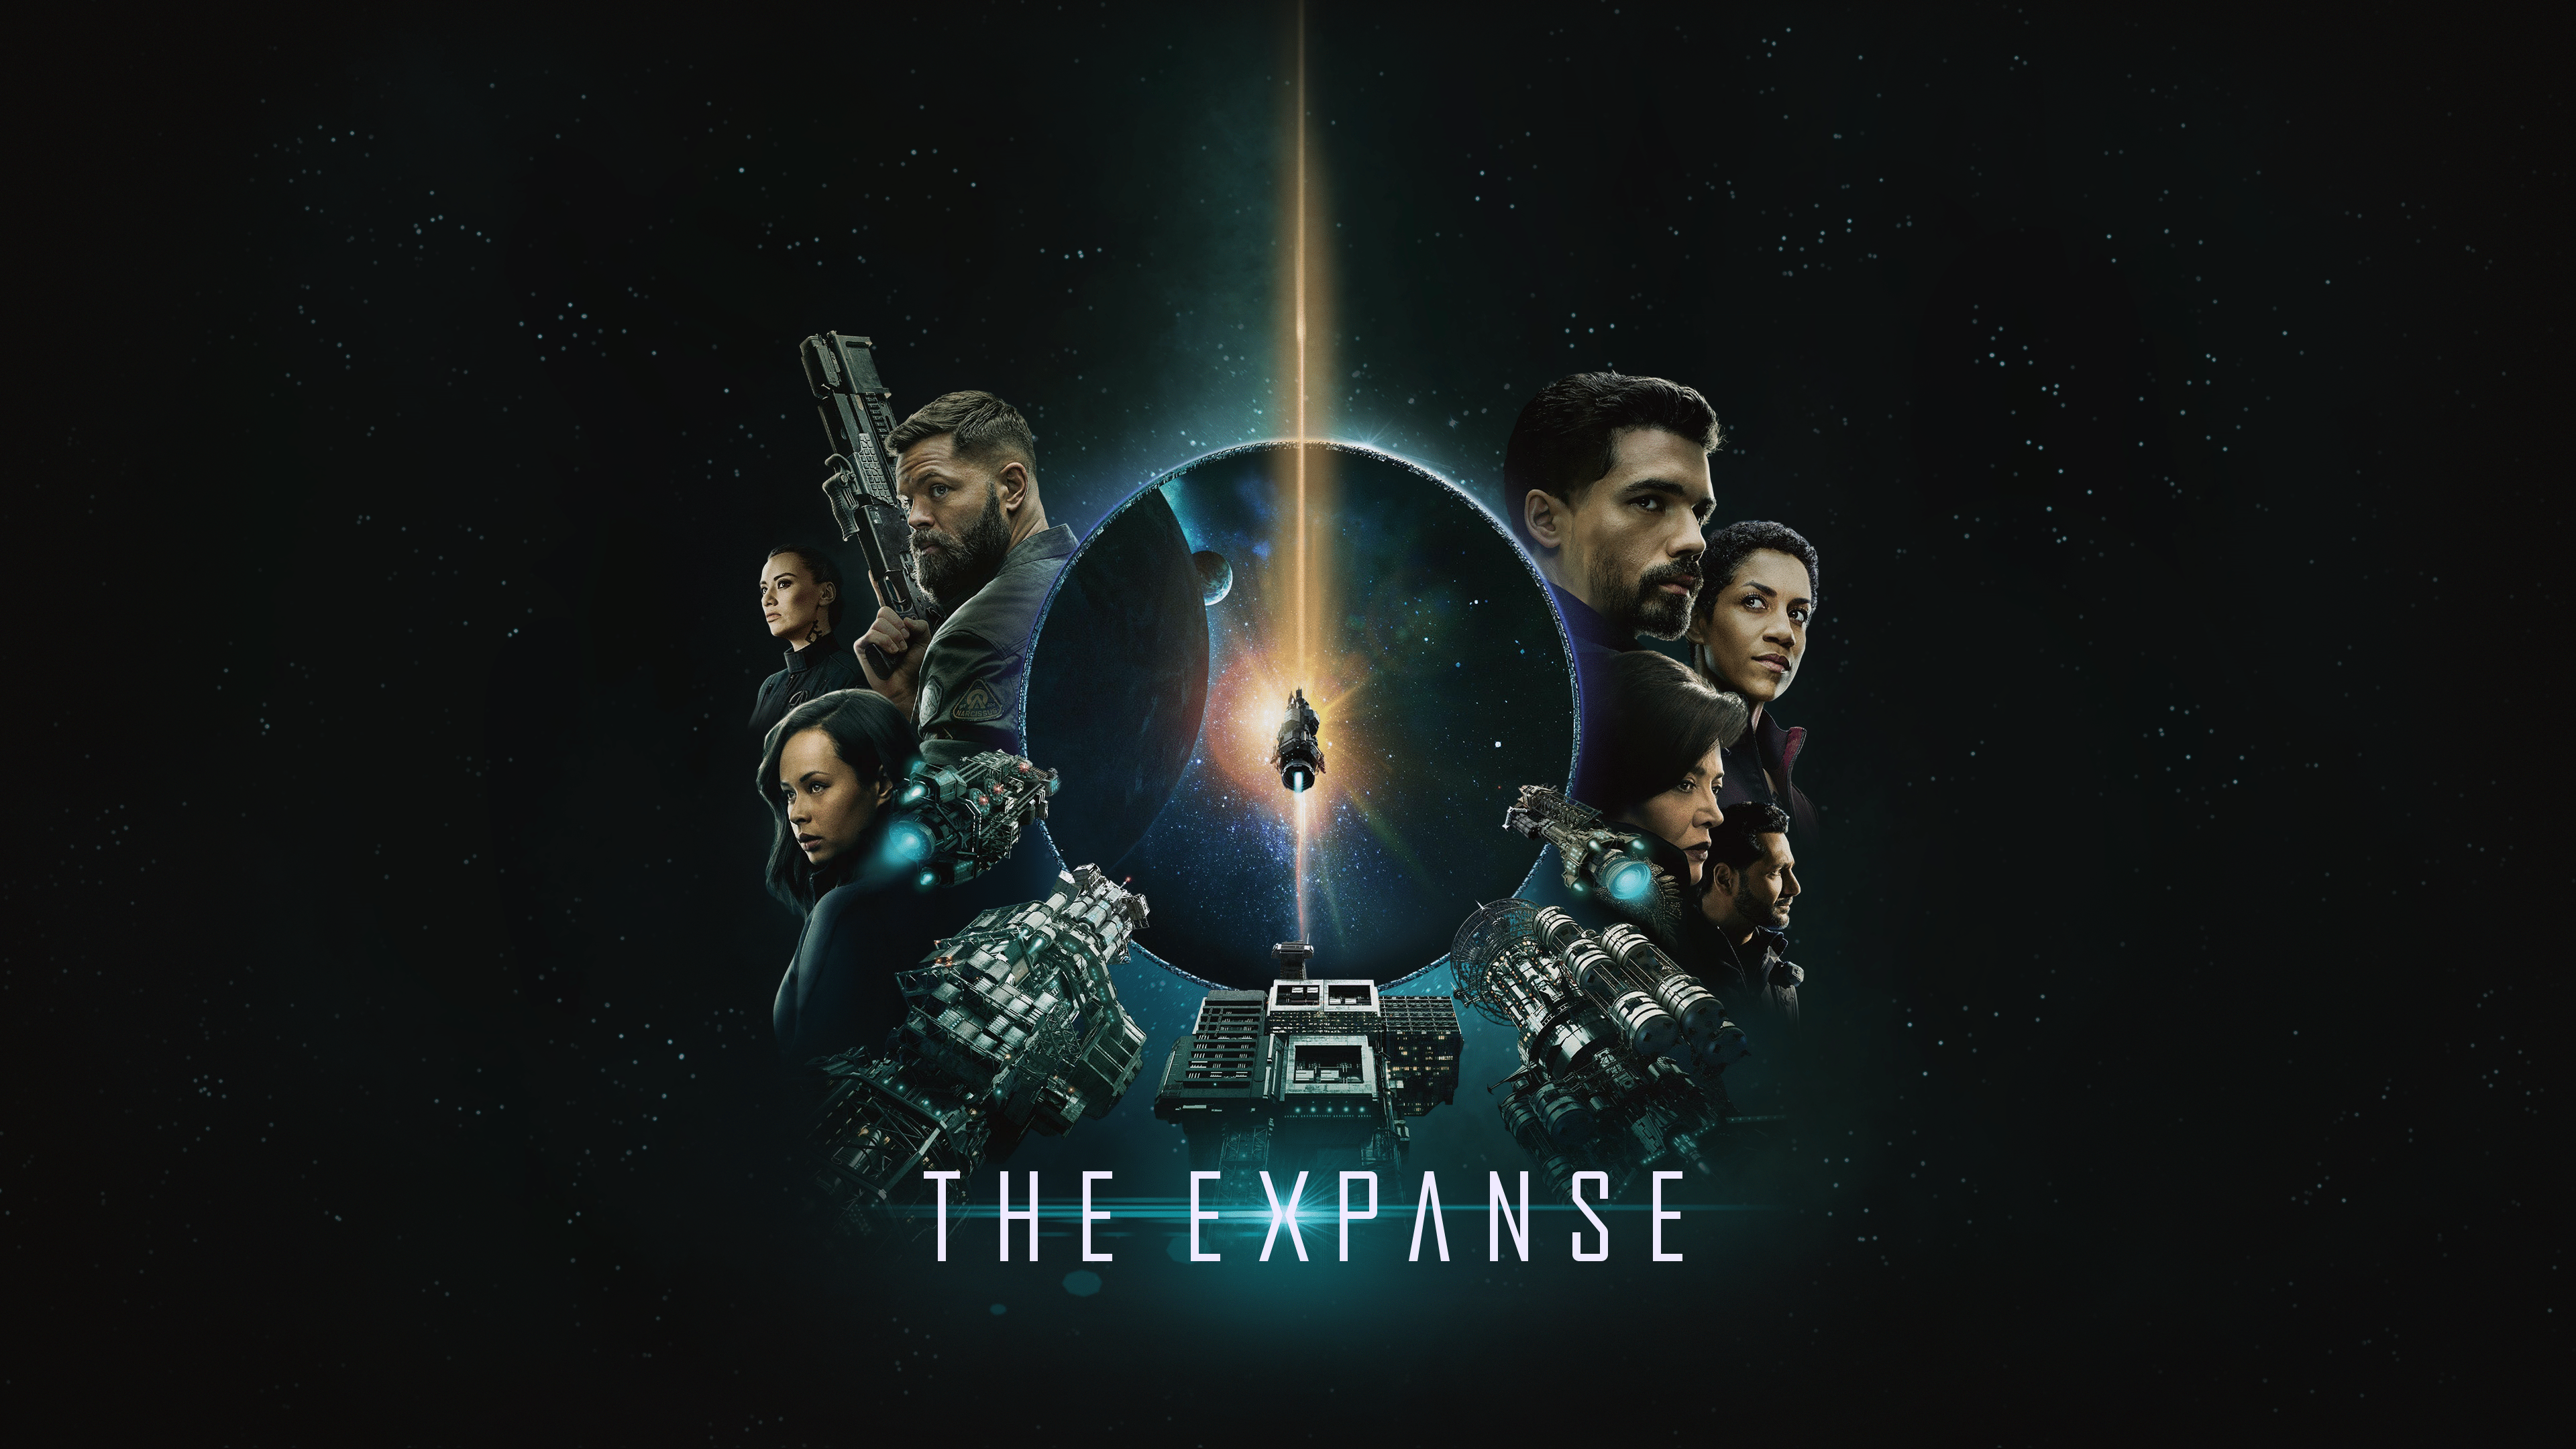 The Expanse Hd Wallpapers Top Free The Expanse Hd Backgrounds 0267